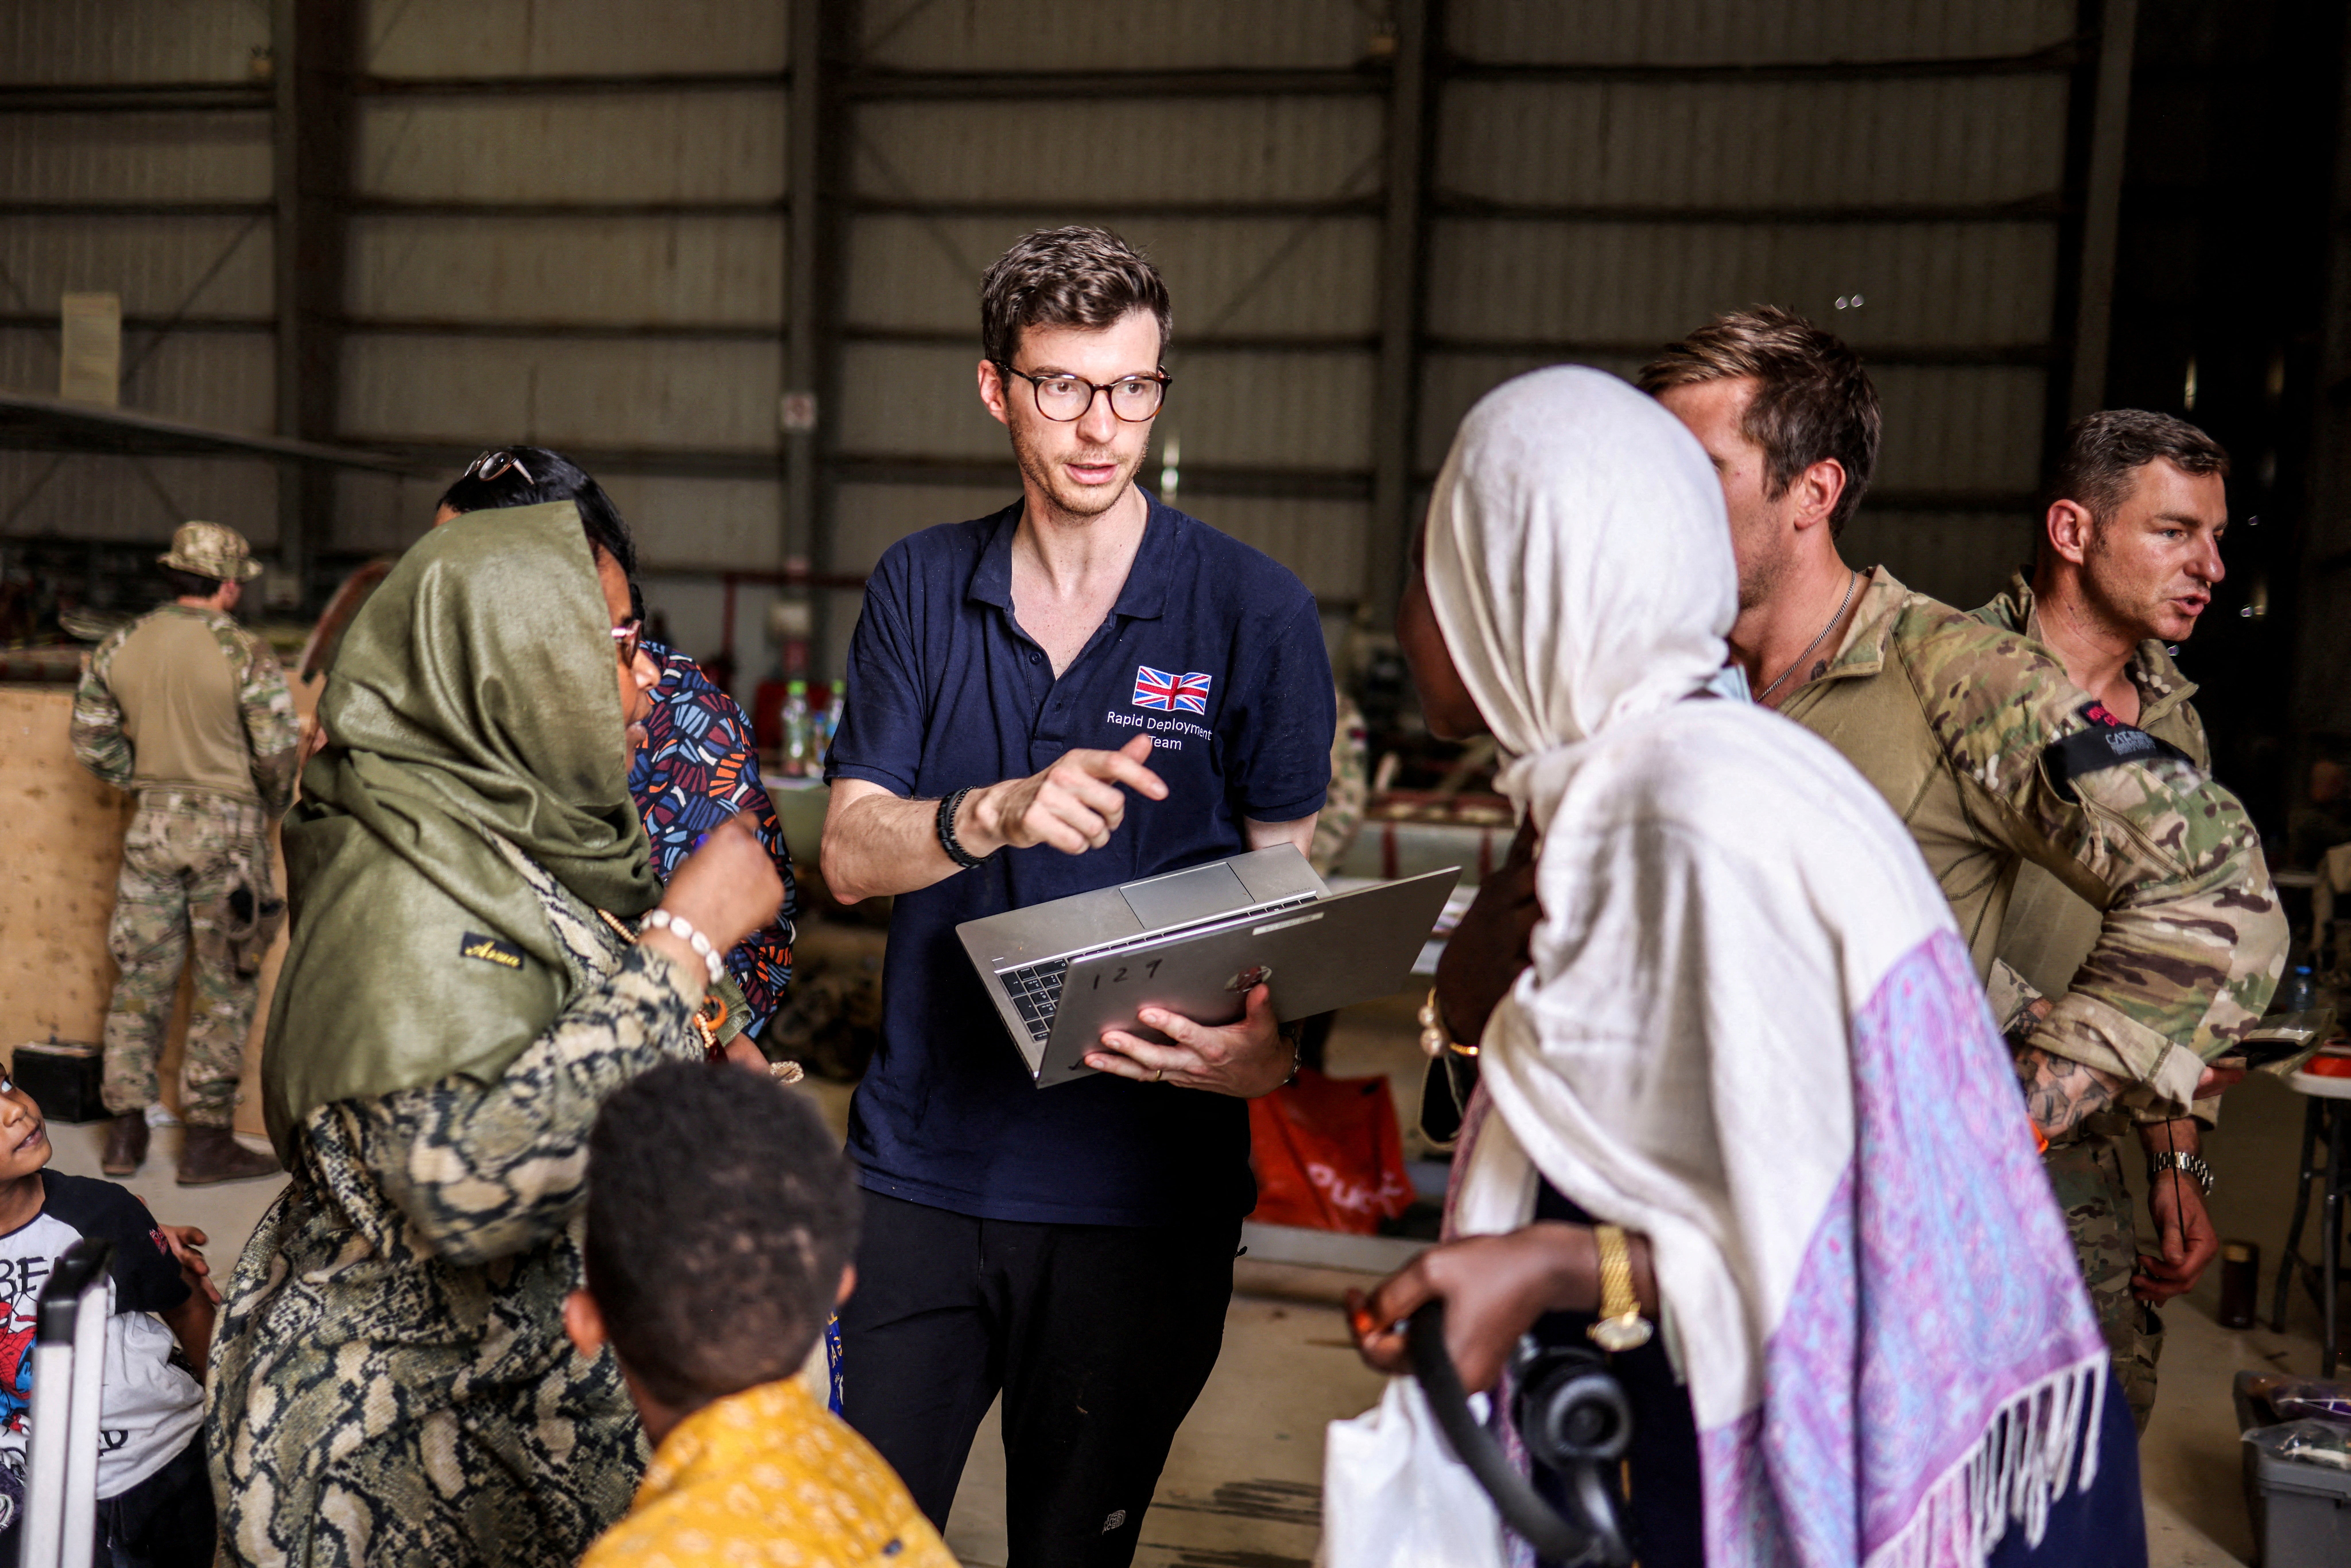 A Foreign and Commonwealth Rapid Response team member helps evacuees before they fly to Cyprus